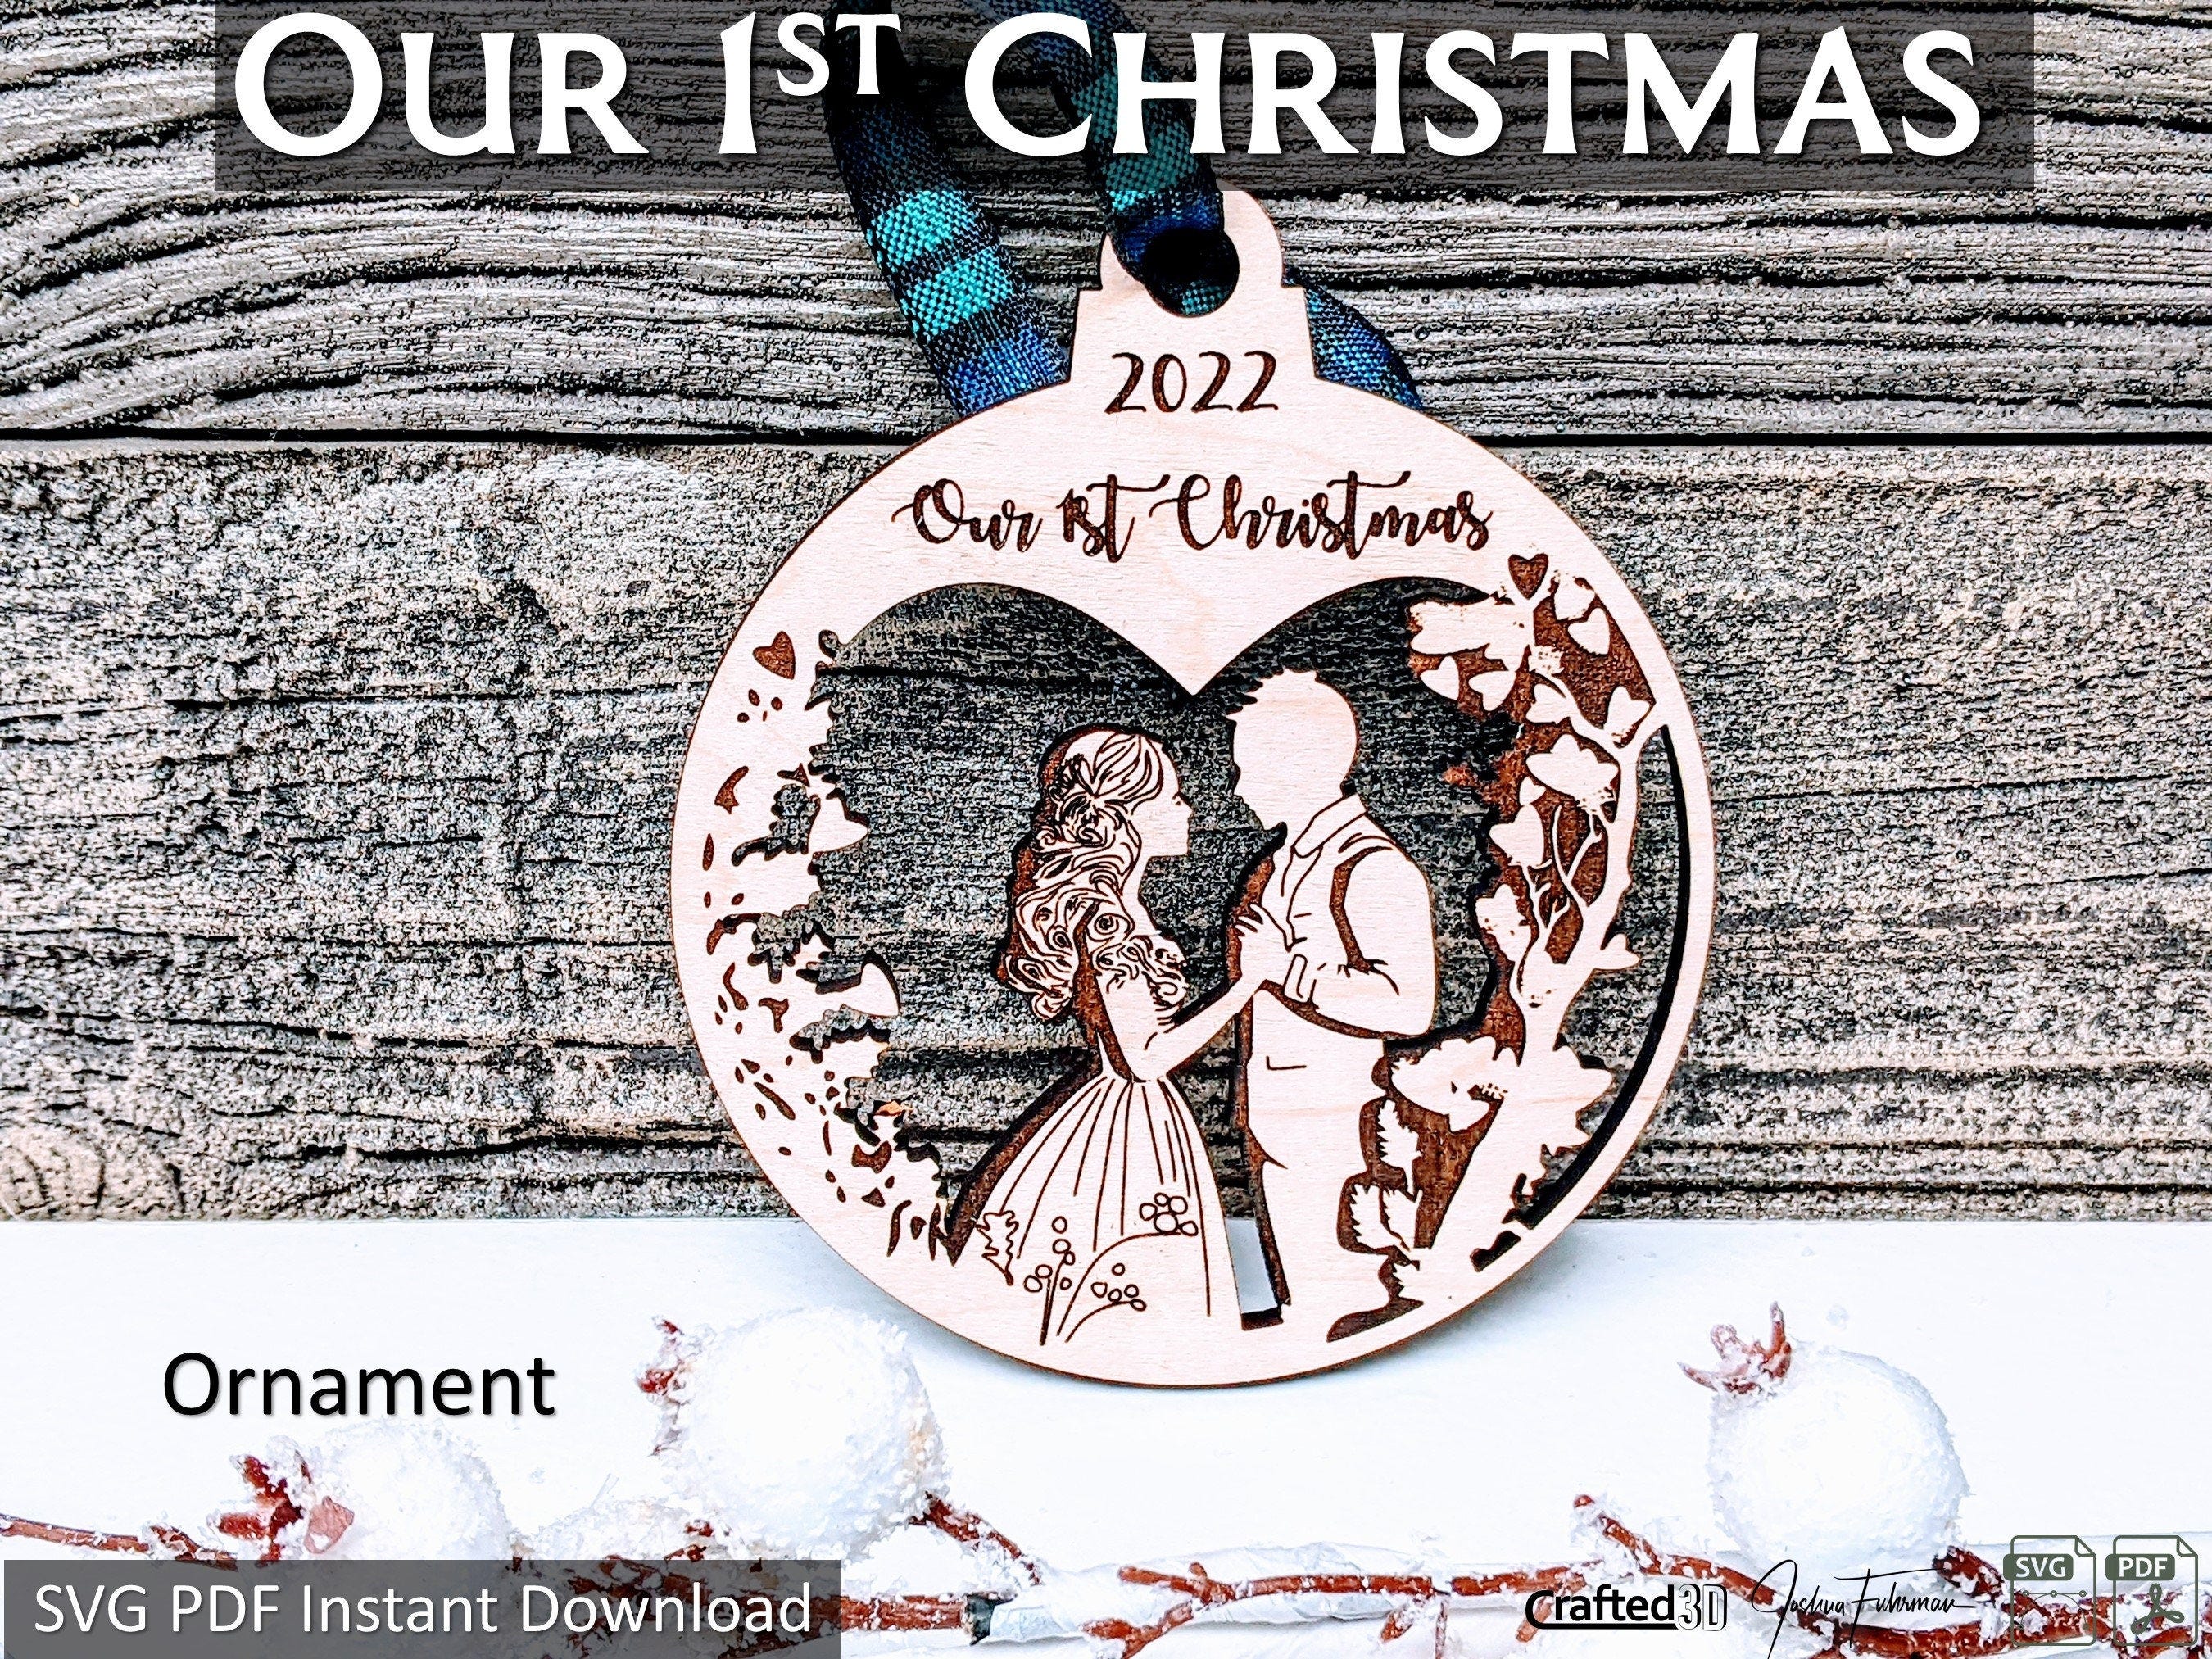 Our 1st Christmas Ornament SVG PDF  | Glowforge Laser Cutter | newlywed couple first Christmas | The year we were married | Tree ornament